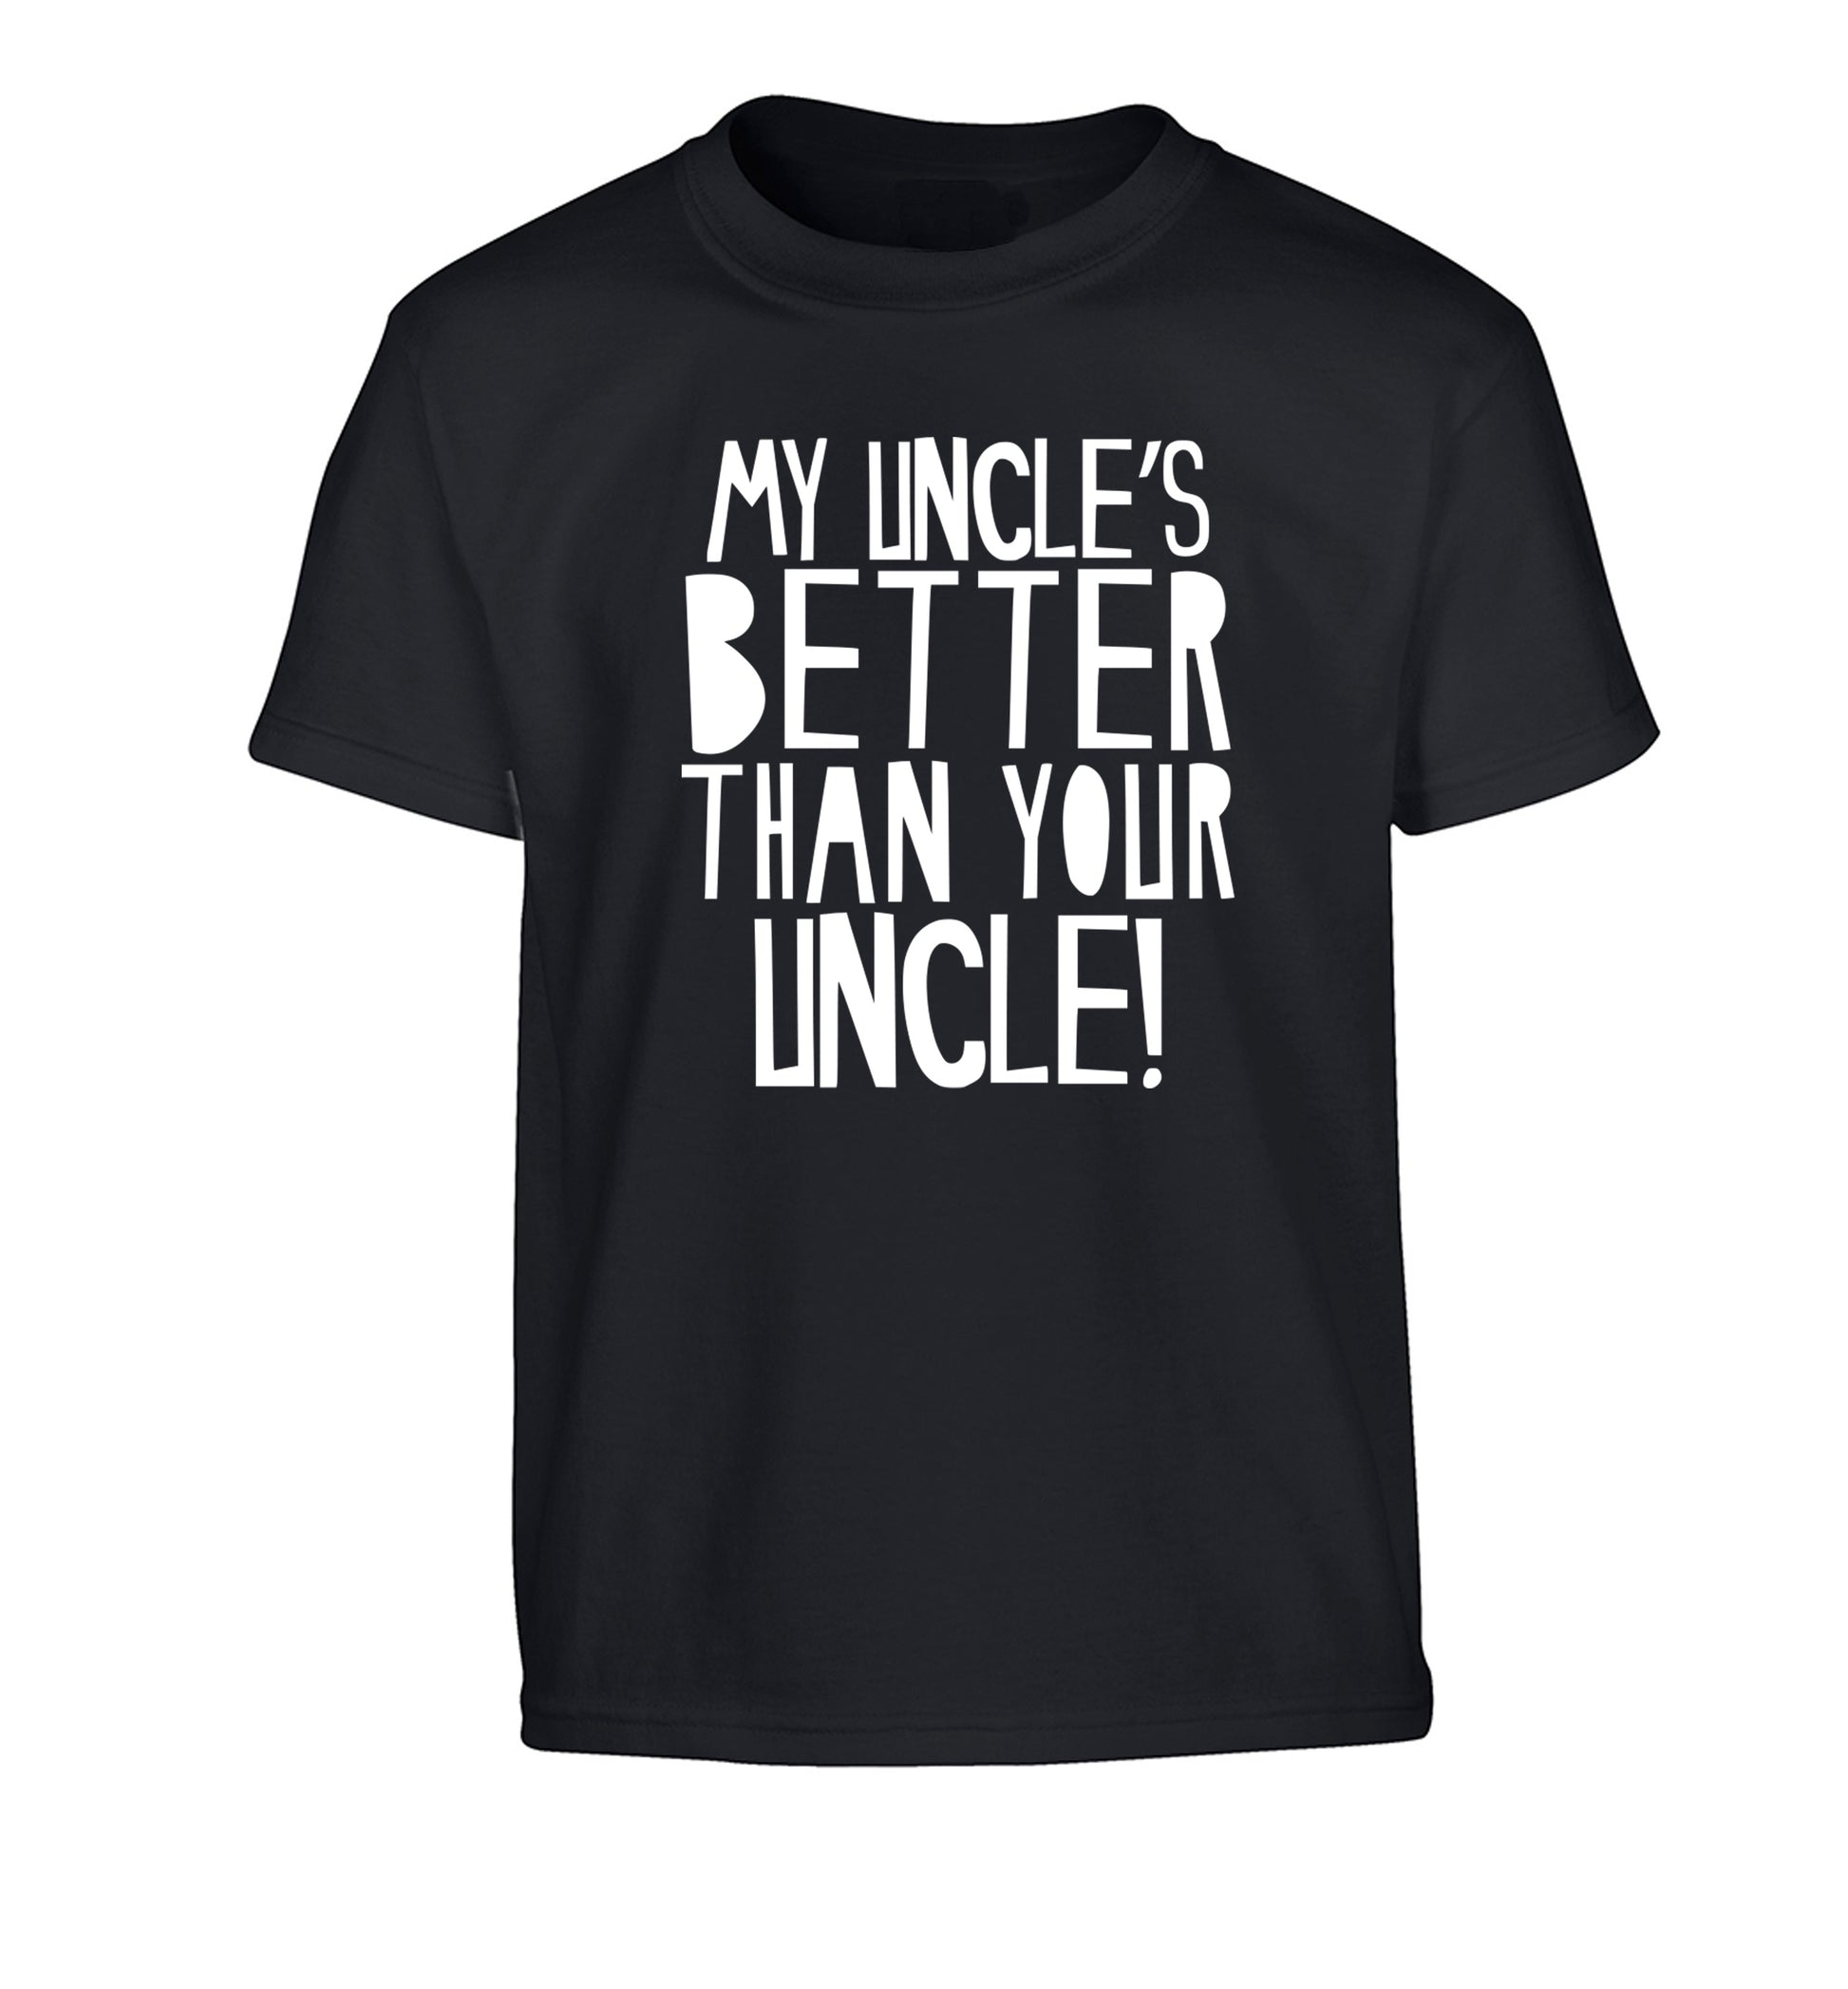 My uncles better than your uncle Children's black Tshirt 12-13 Years